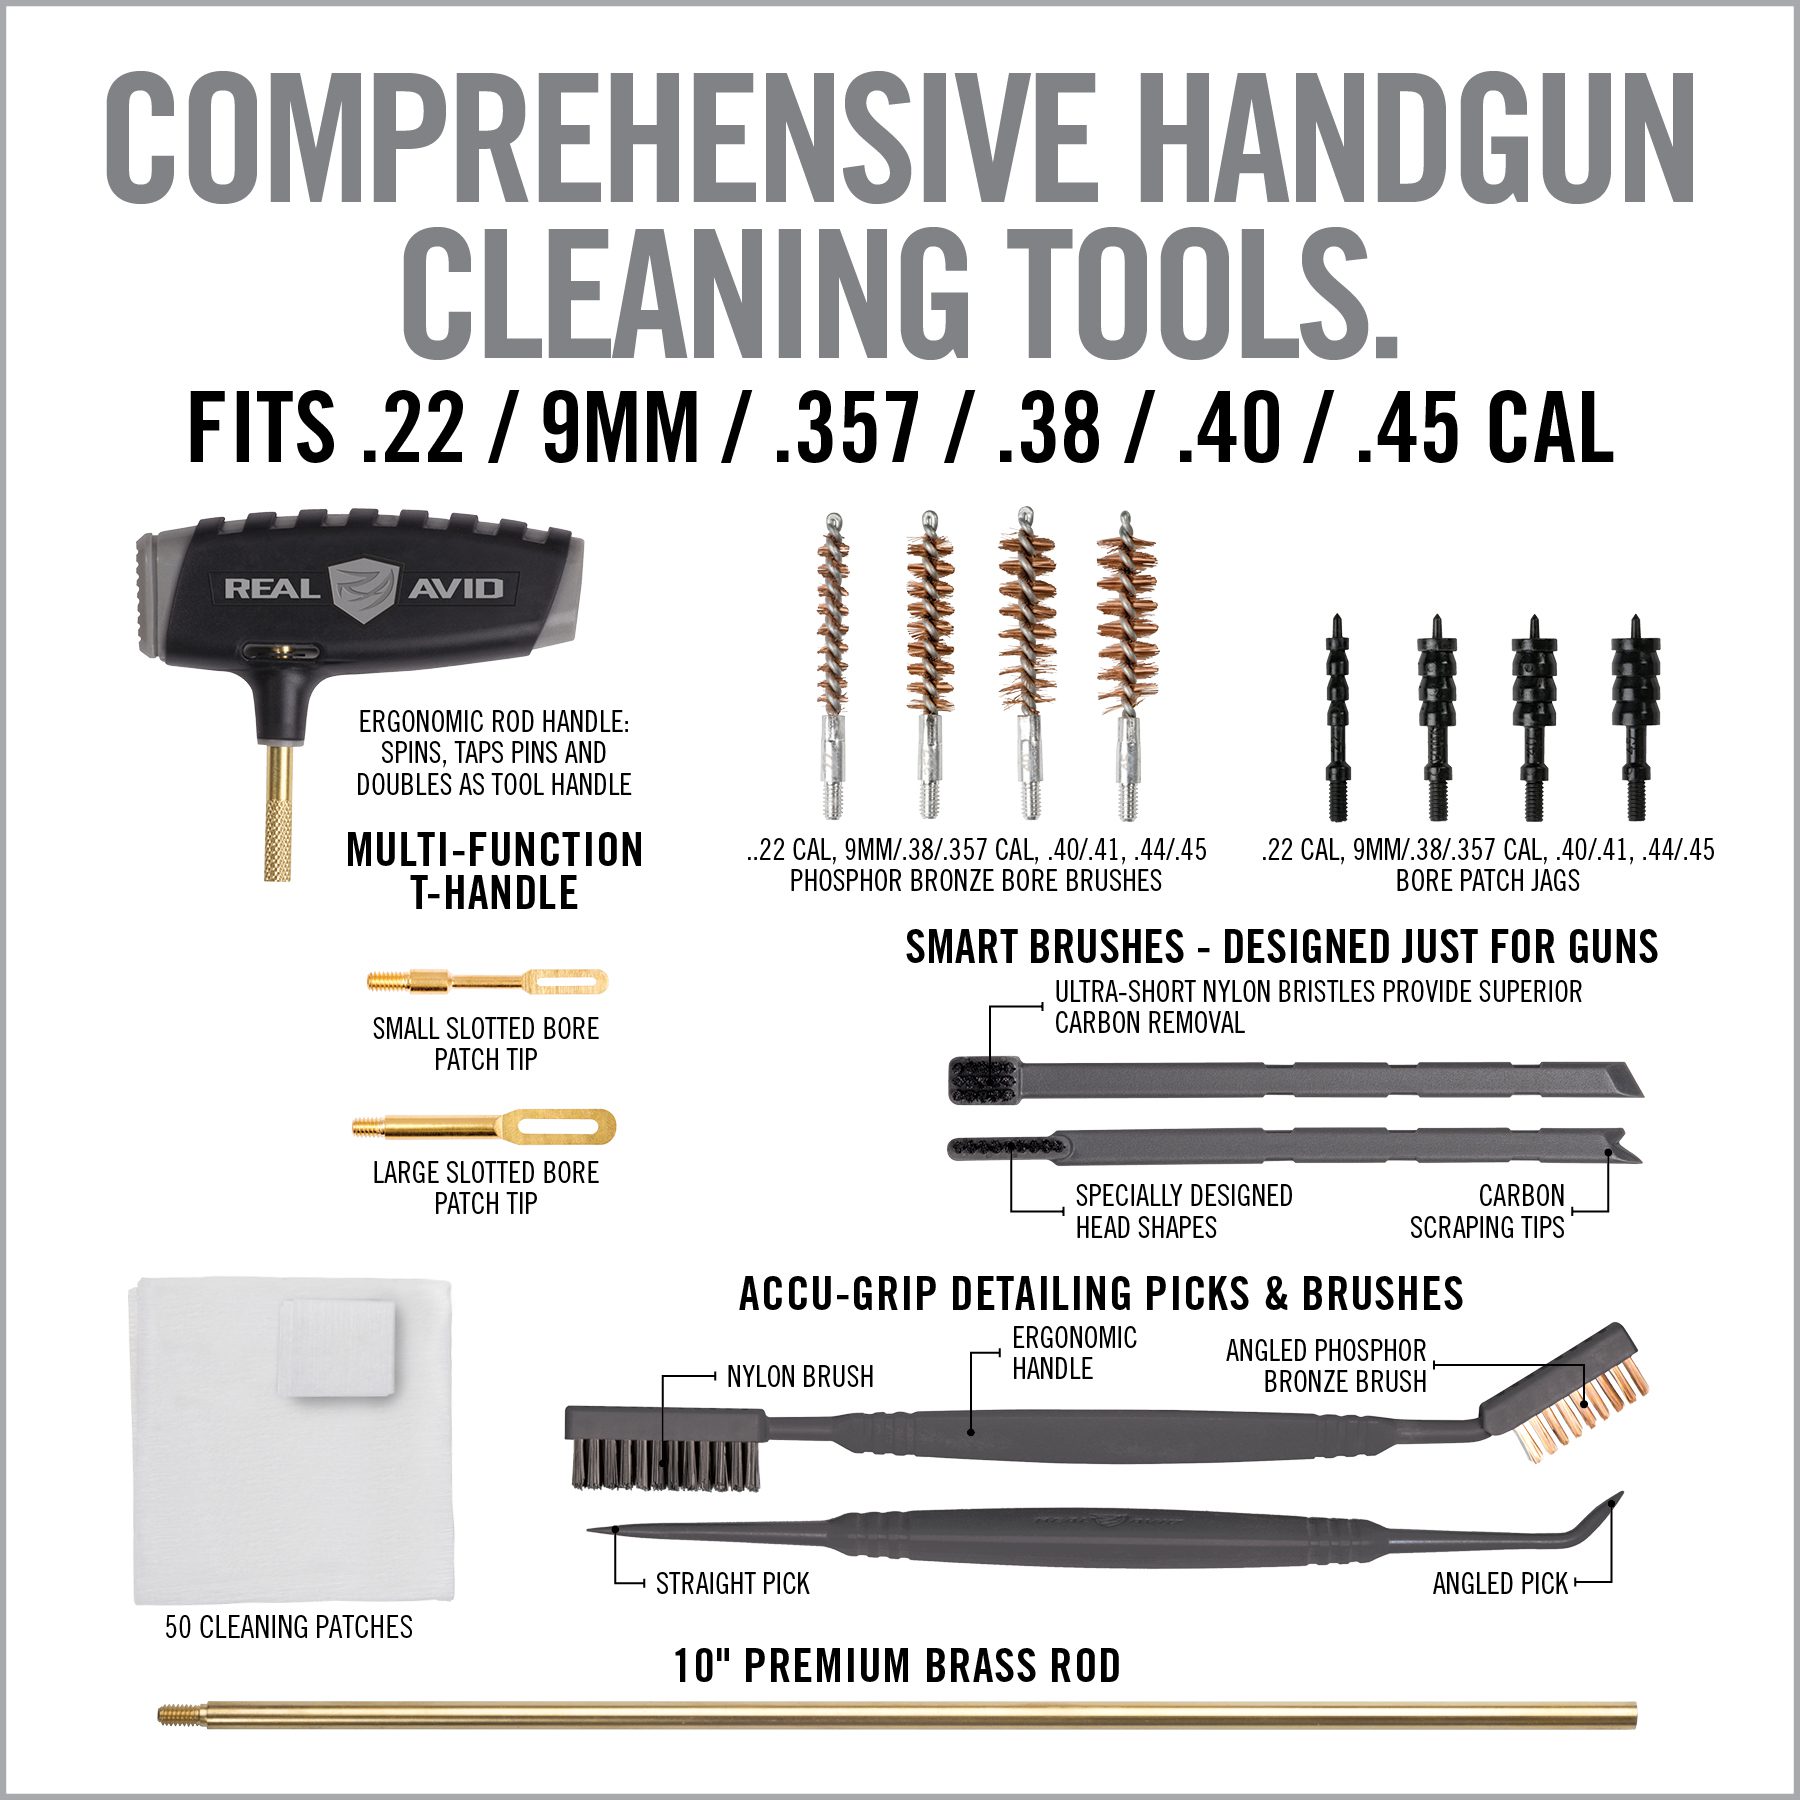 the complete guide to compreensive hand gun cleaning tools